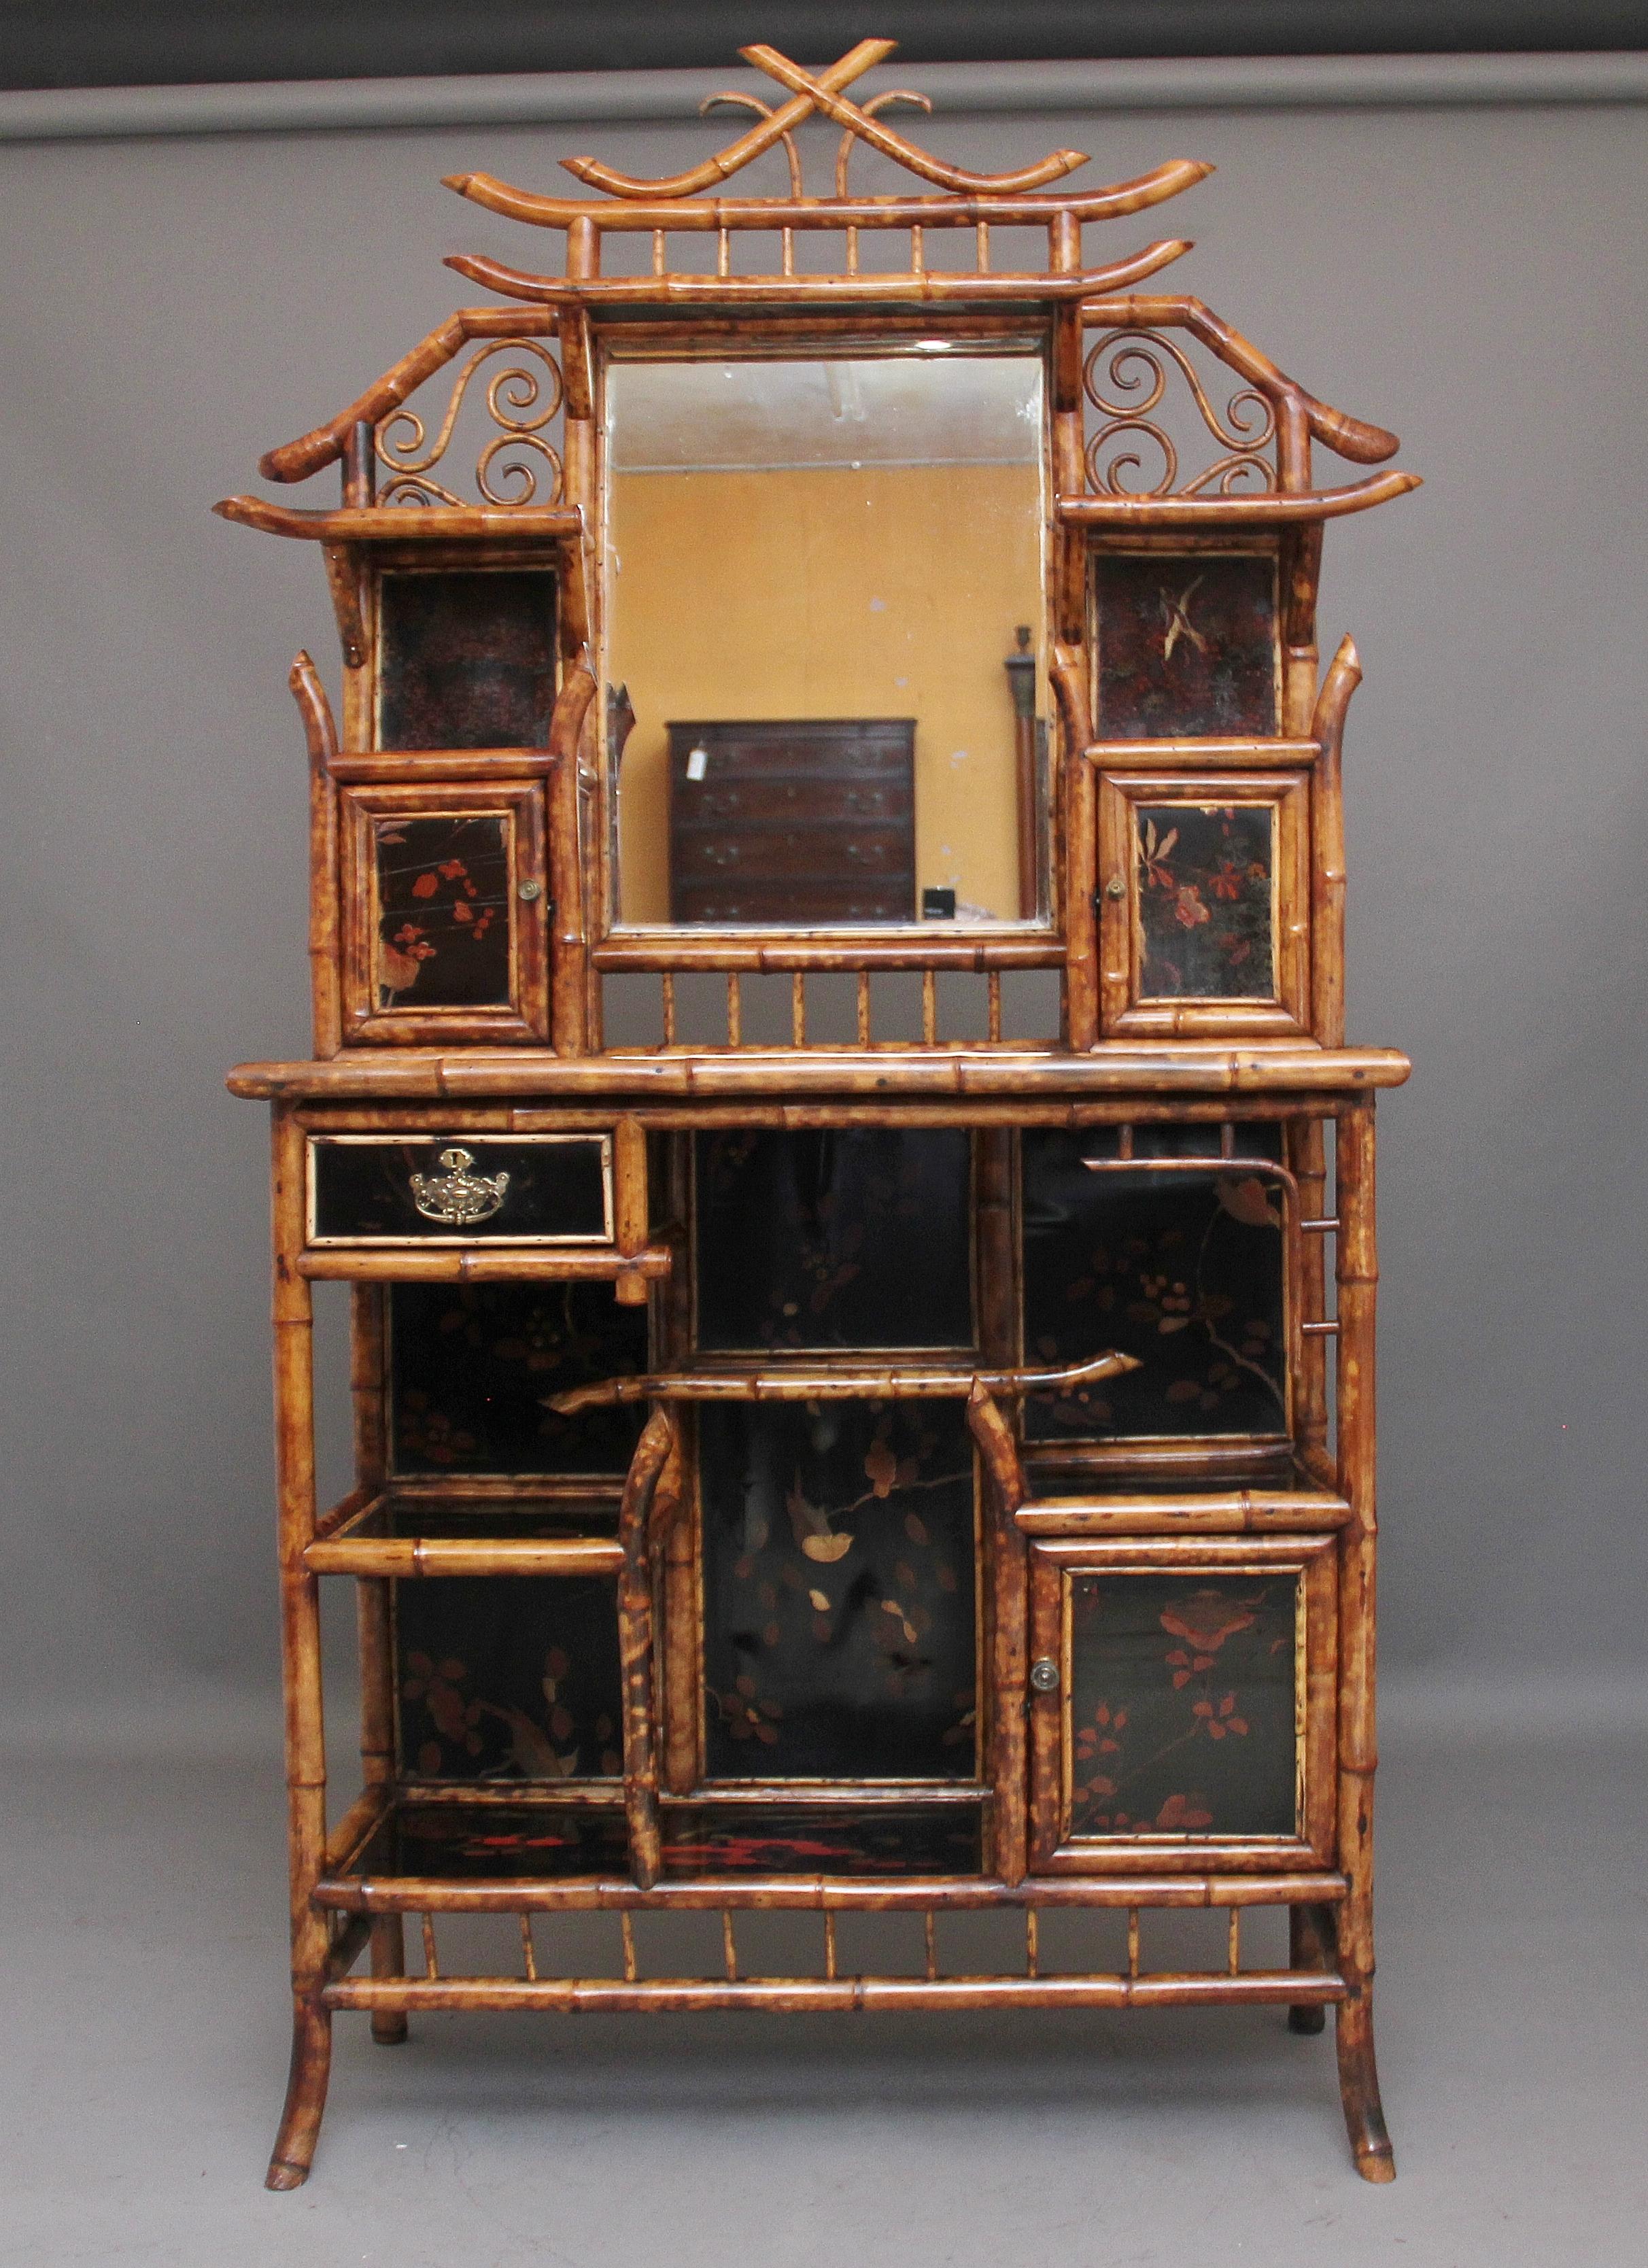 An impressive 19th century bamboo cabinet, having twenty nine original decorative lacquer panels depicting floral scenes, a mirrored shelved back, various cupboards and shelves and a drawer with brass plate handle, the shaped bamboo makes this